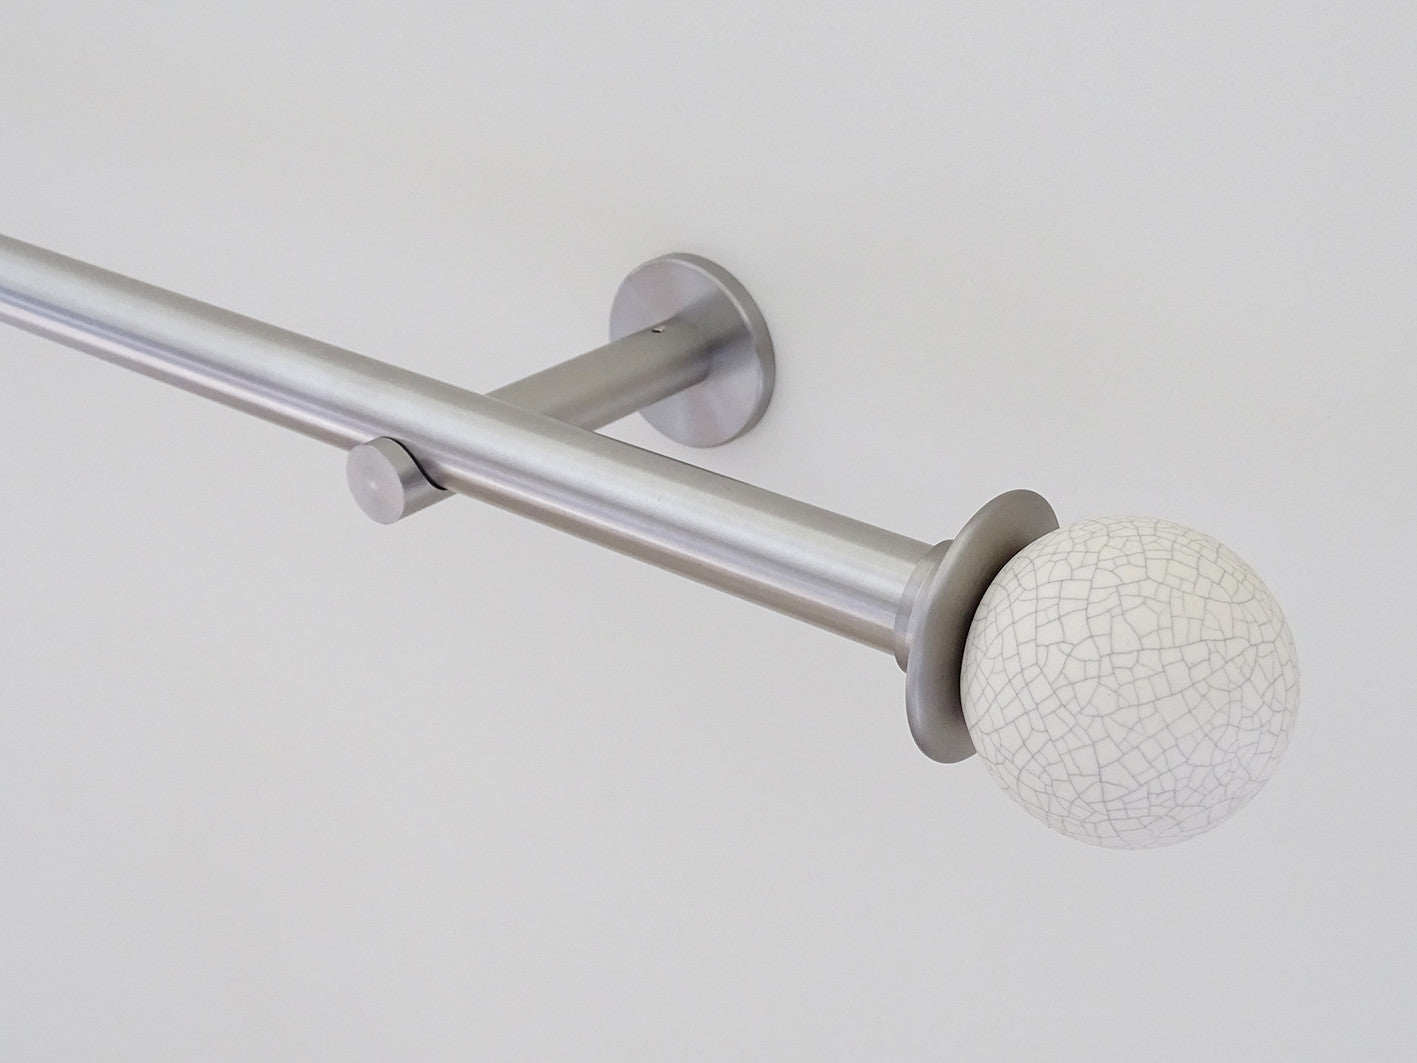 19mm diameter stainless steel curtain pole set with ceramic crackle finials, clear